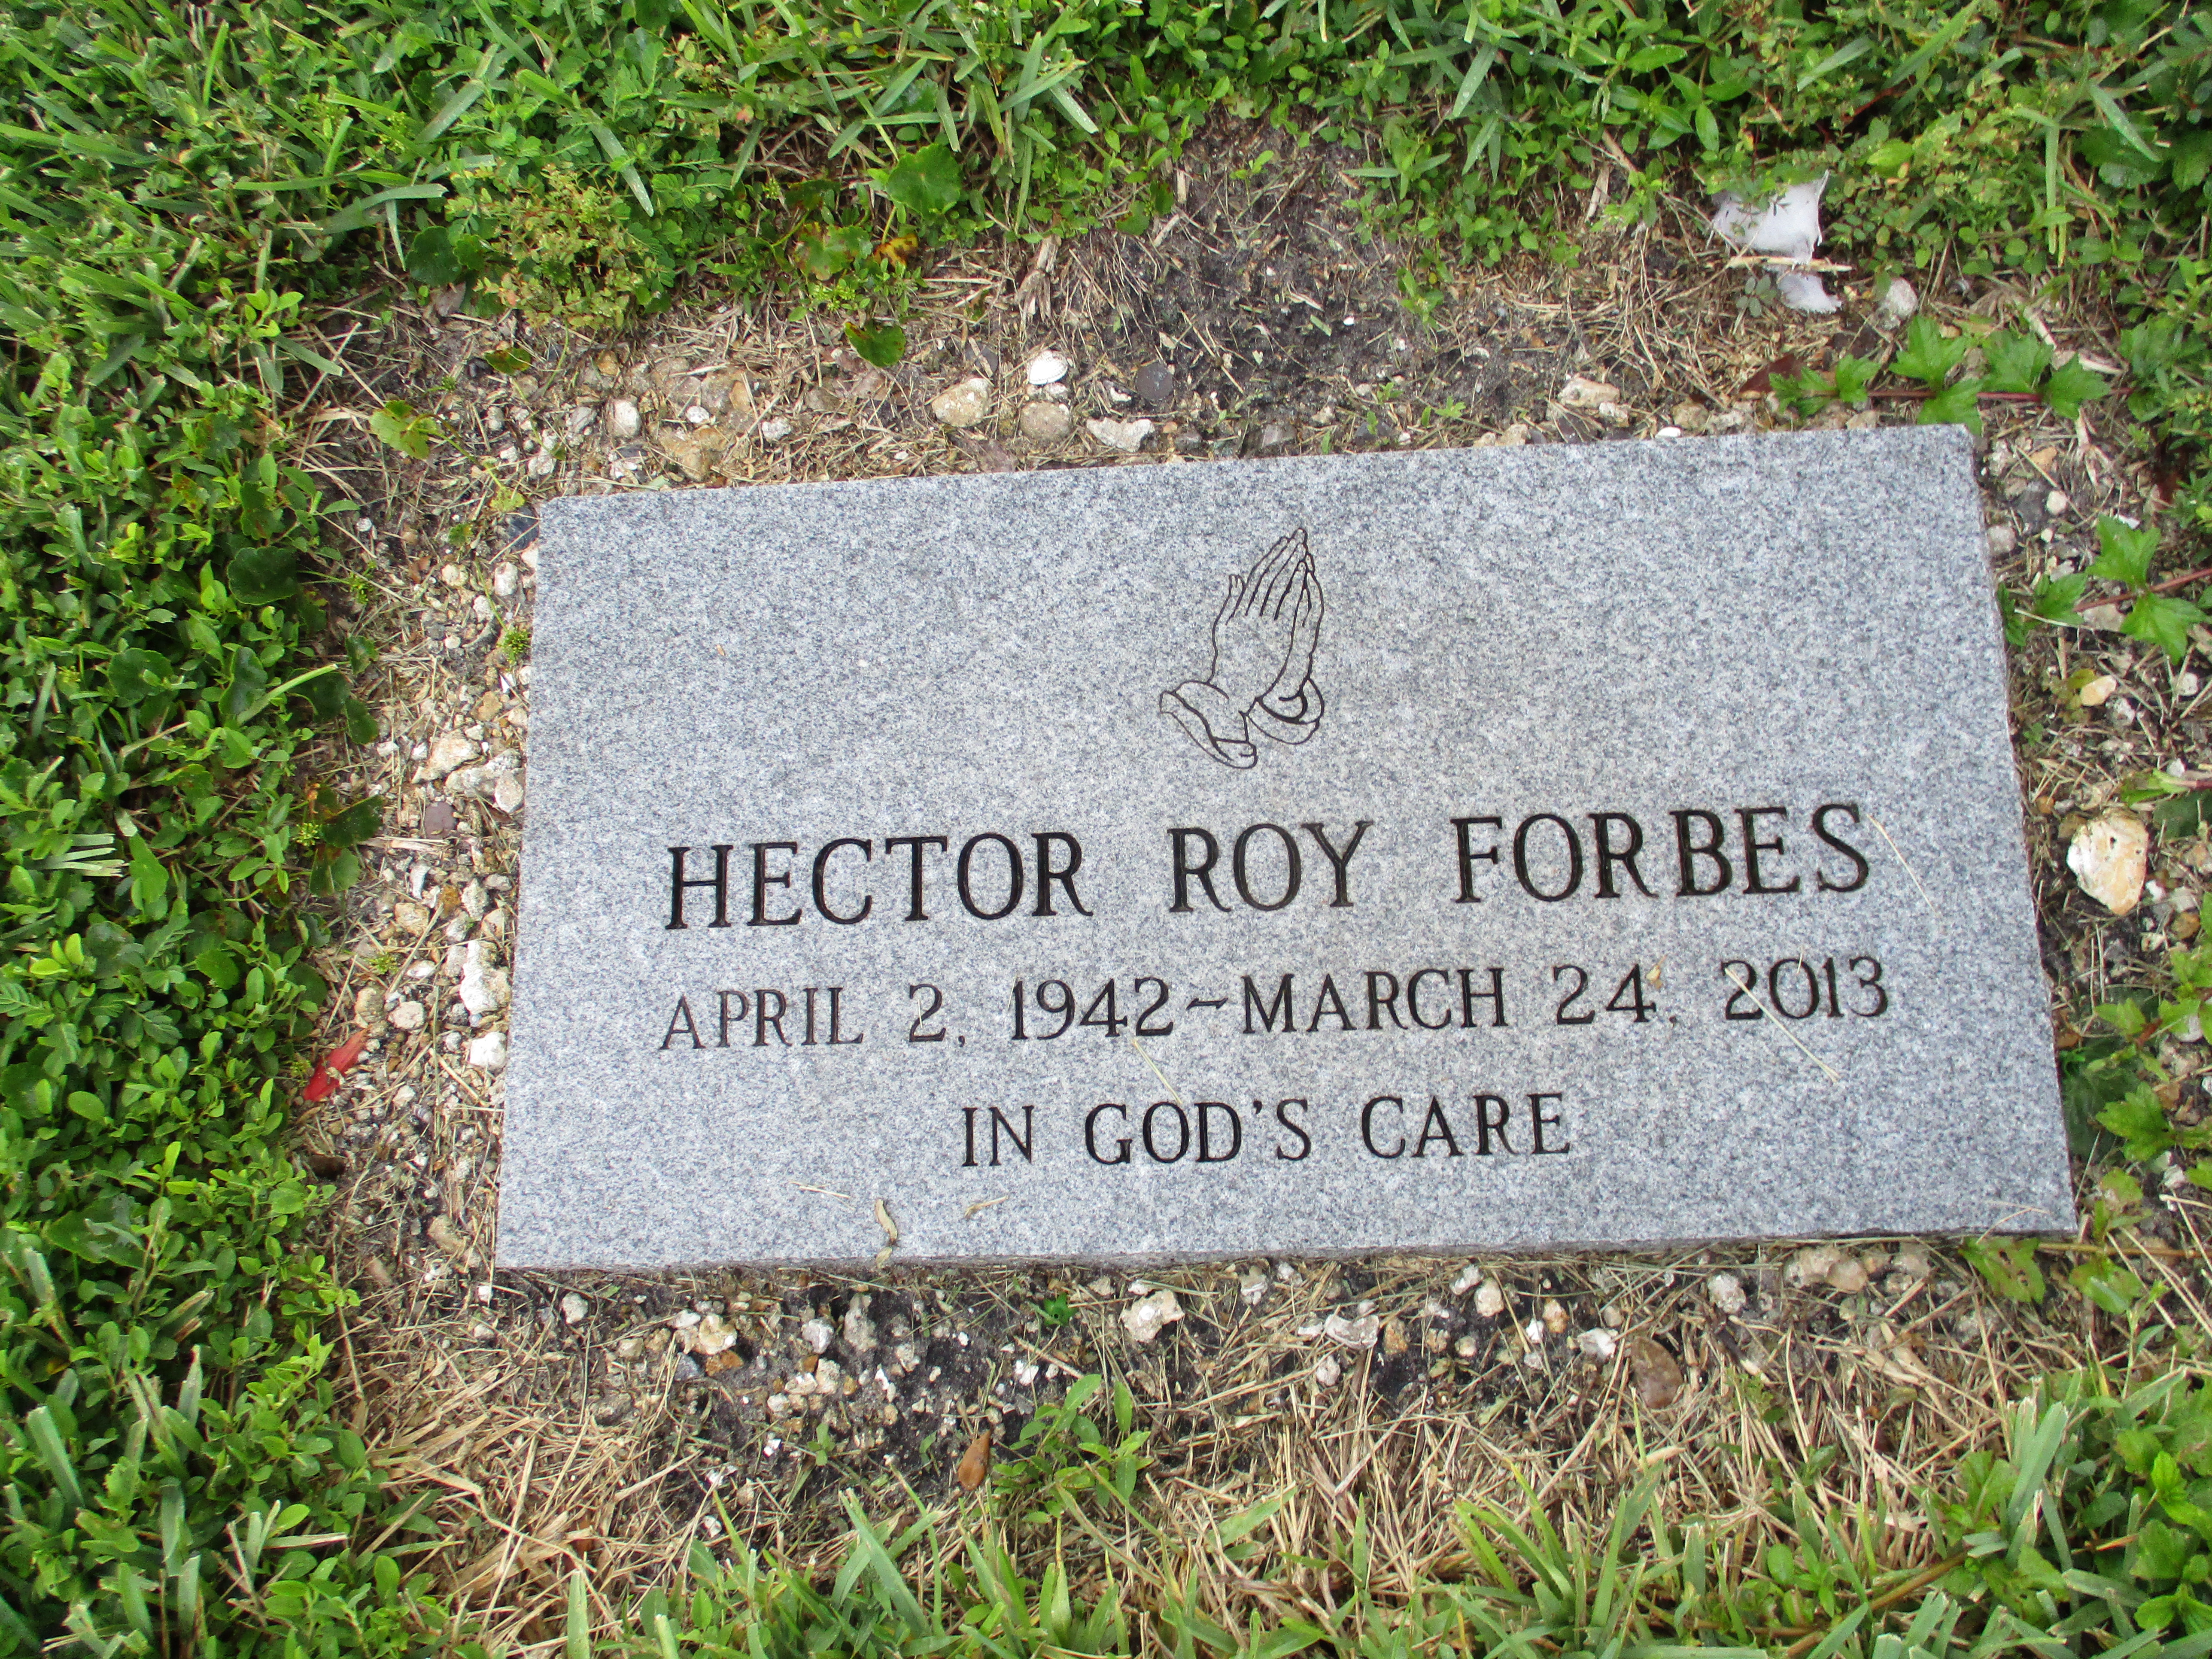 Hector Roy Forbes